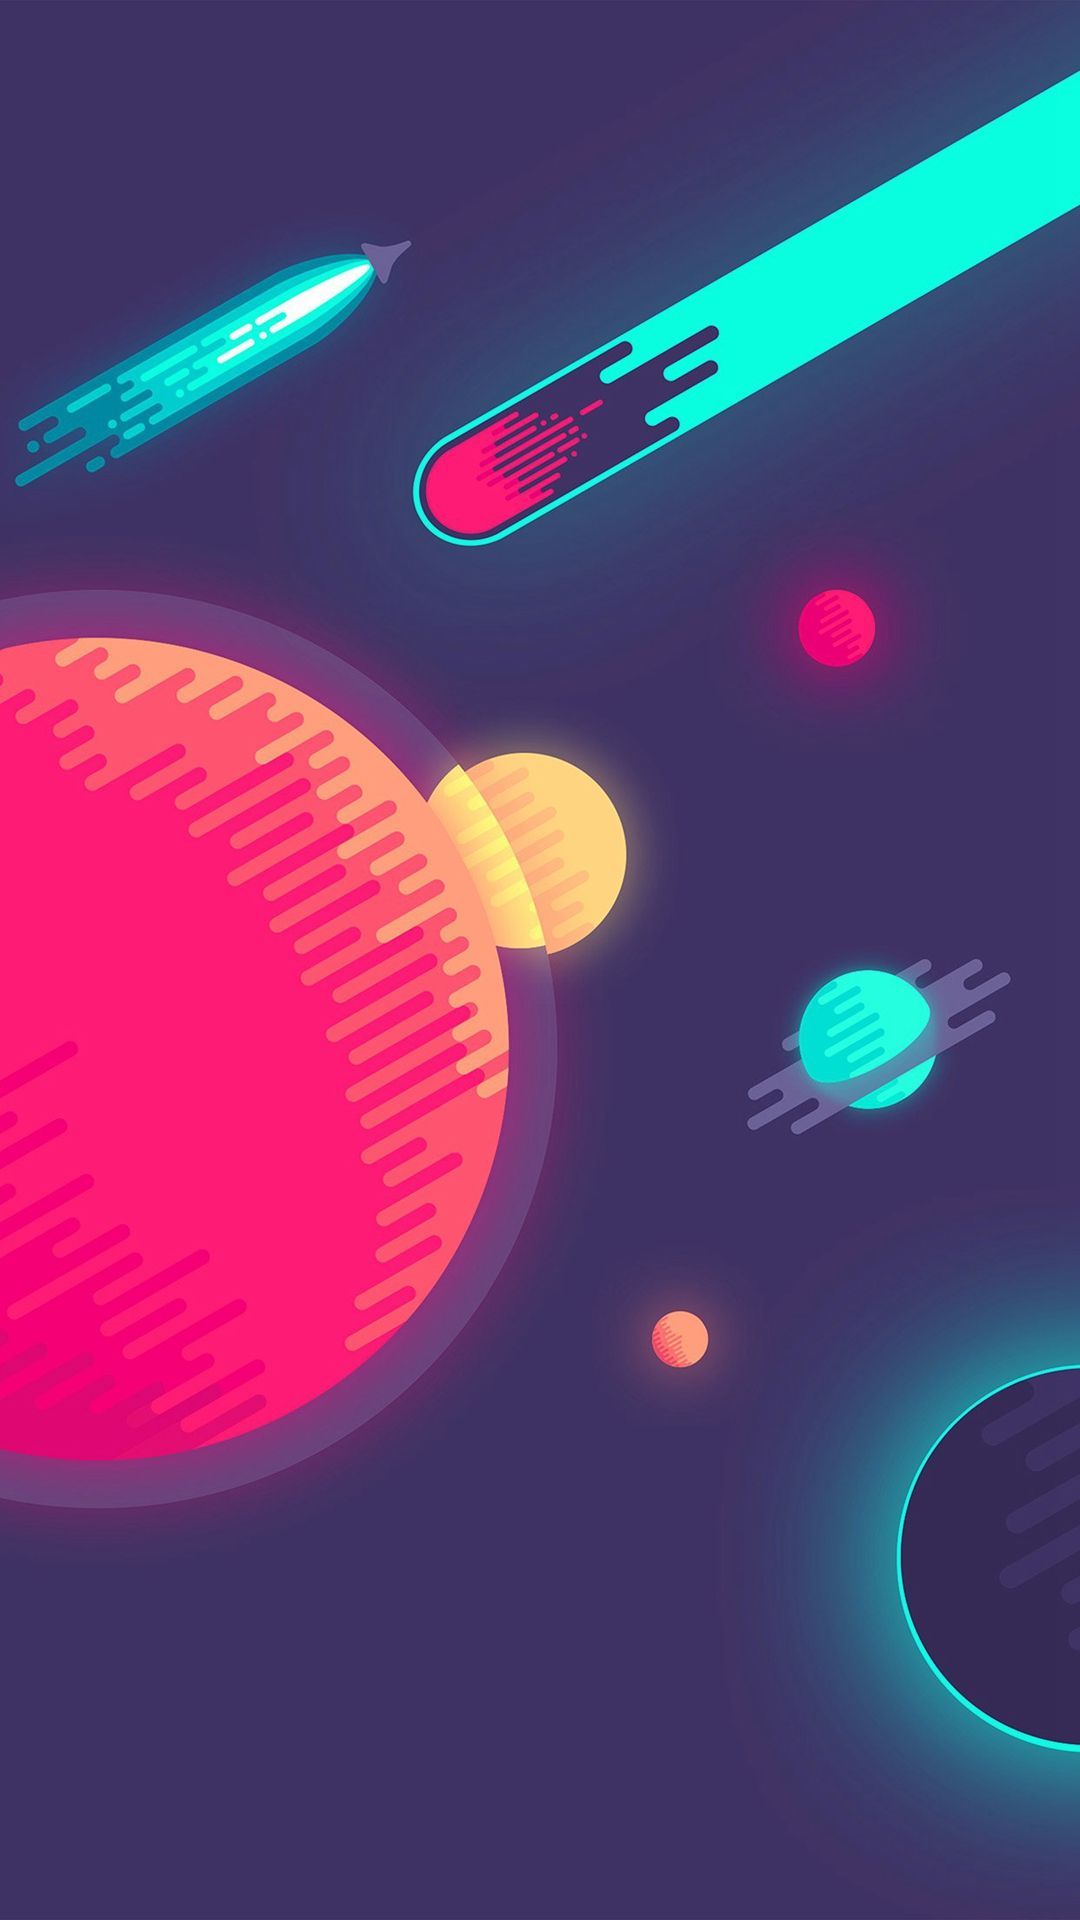 Space Minimal Art Illustration iPhone 6 Wallpapers Download